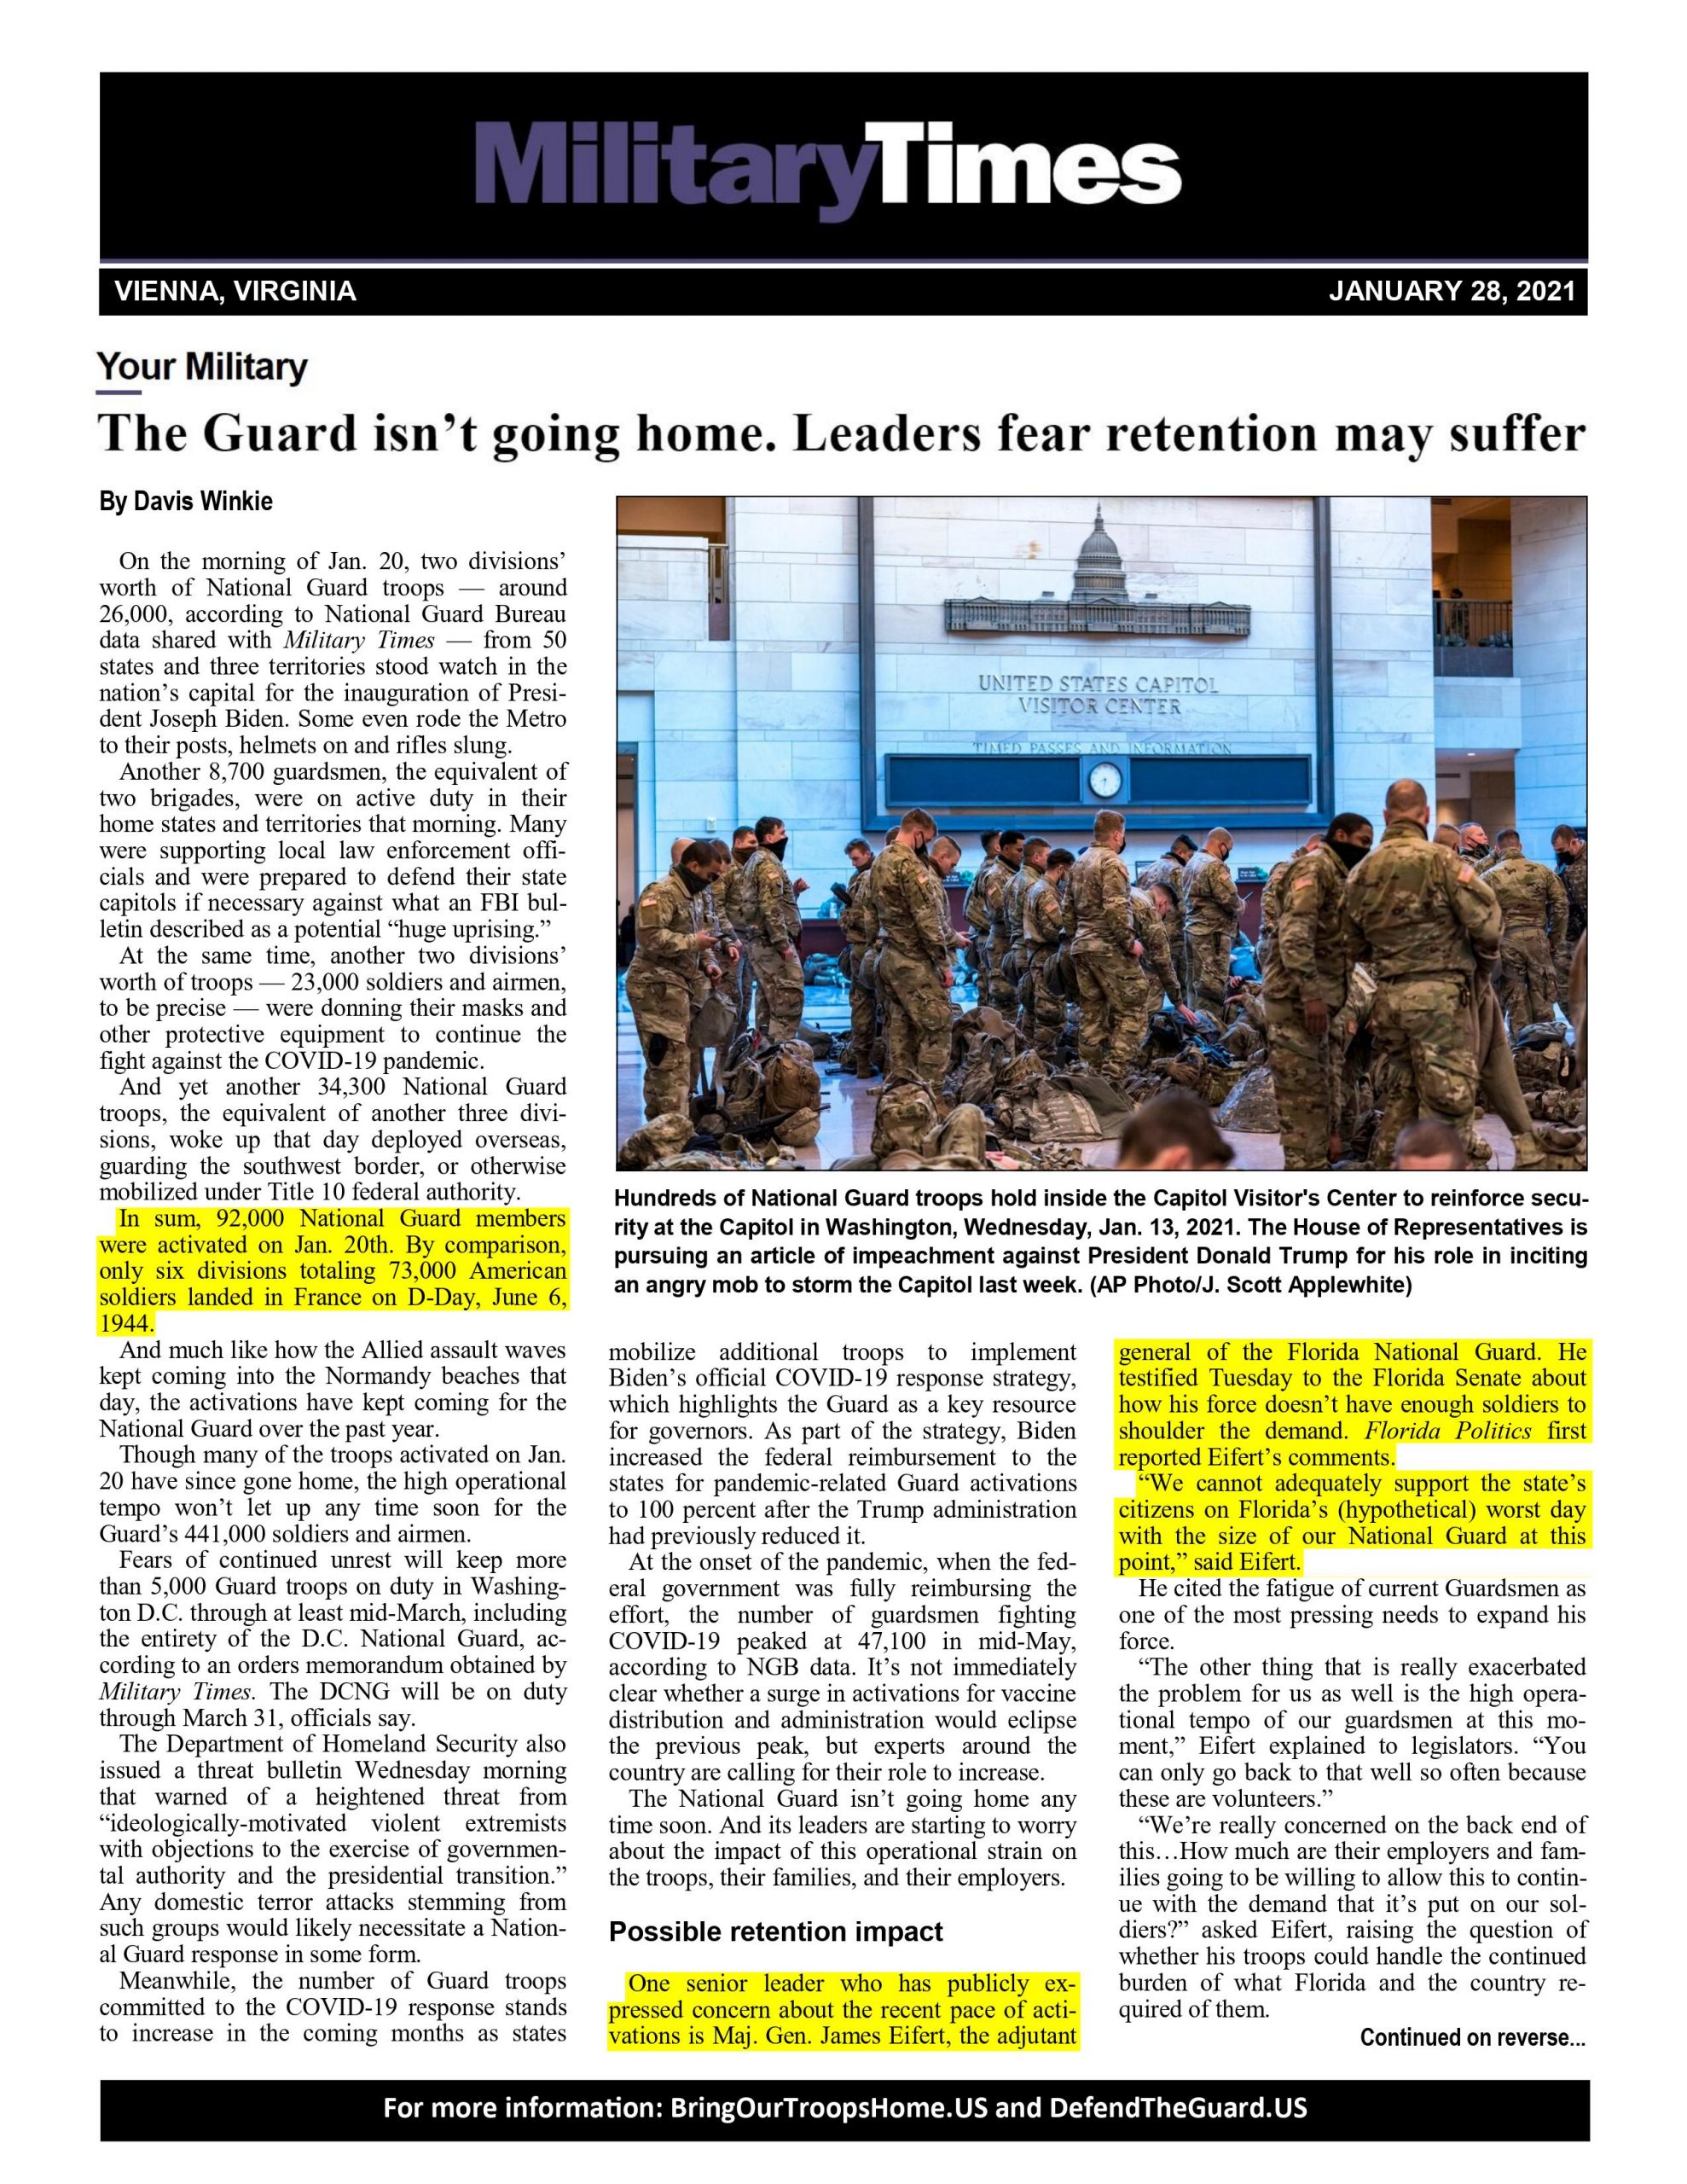 The Guard Isn’t Going Home; Leaders Fear Retention May Suffer